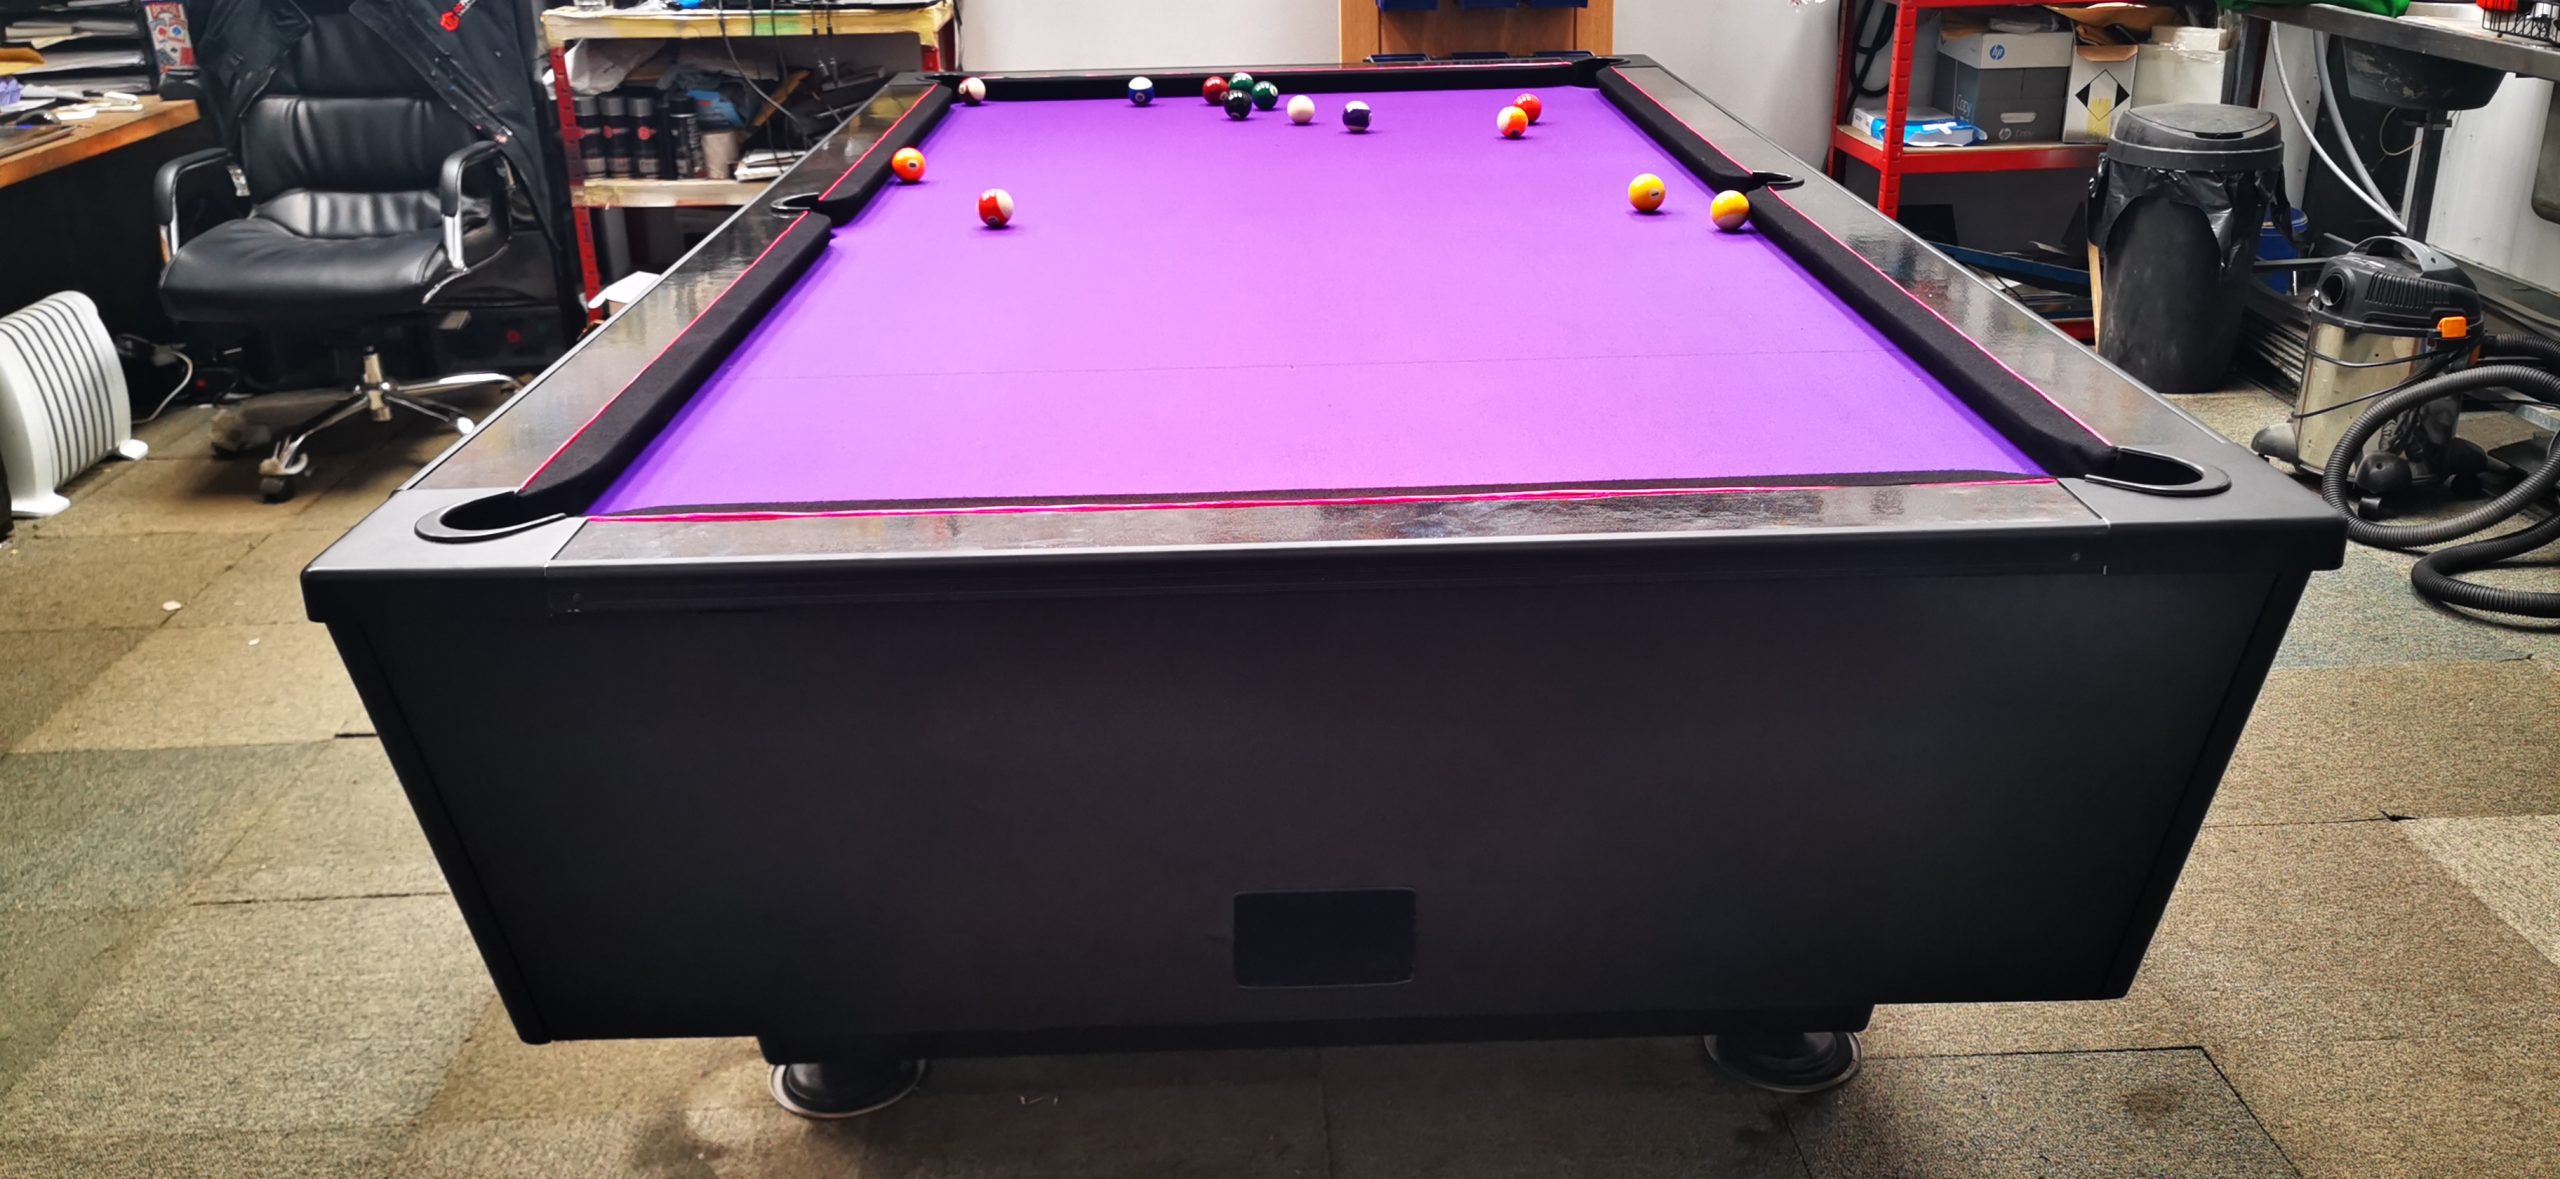 completed pool table